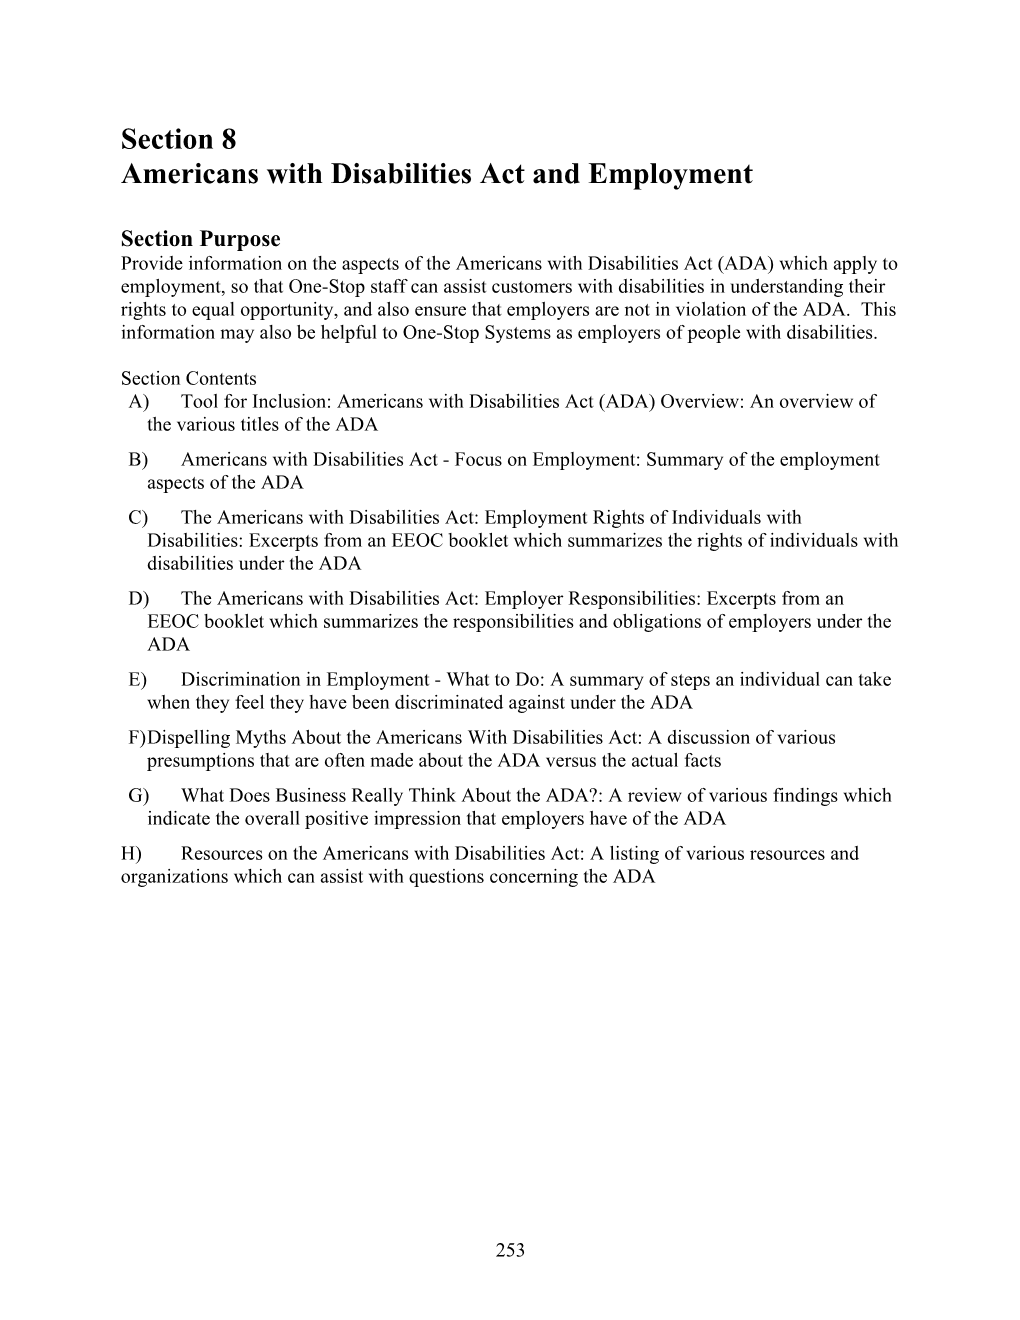 Americans with Disabilities Act and Employment